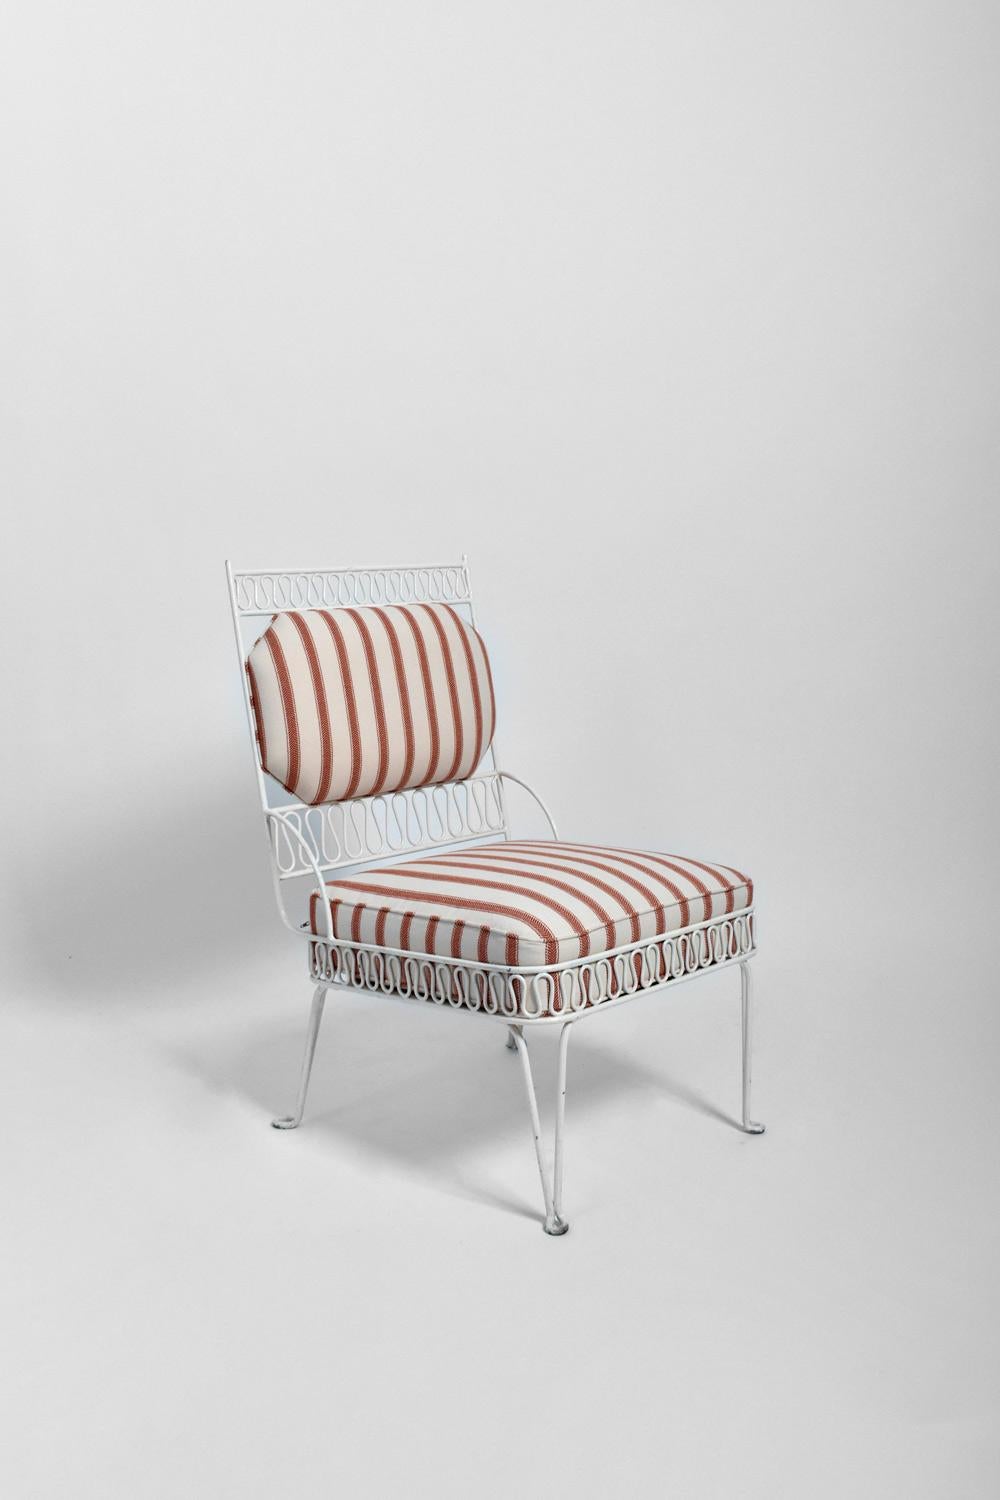 Pair of white painted tubular iron firesides armchairs with a ripple decoration on the belt and on the backrest . Spain, 1950s.